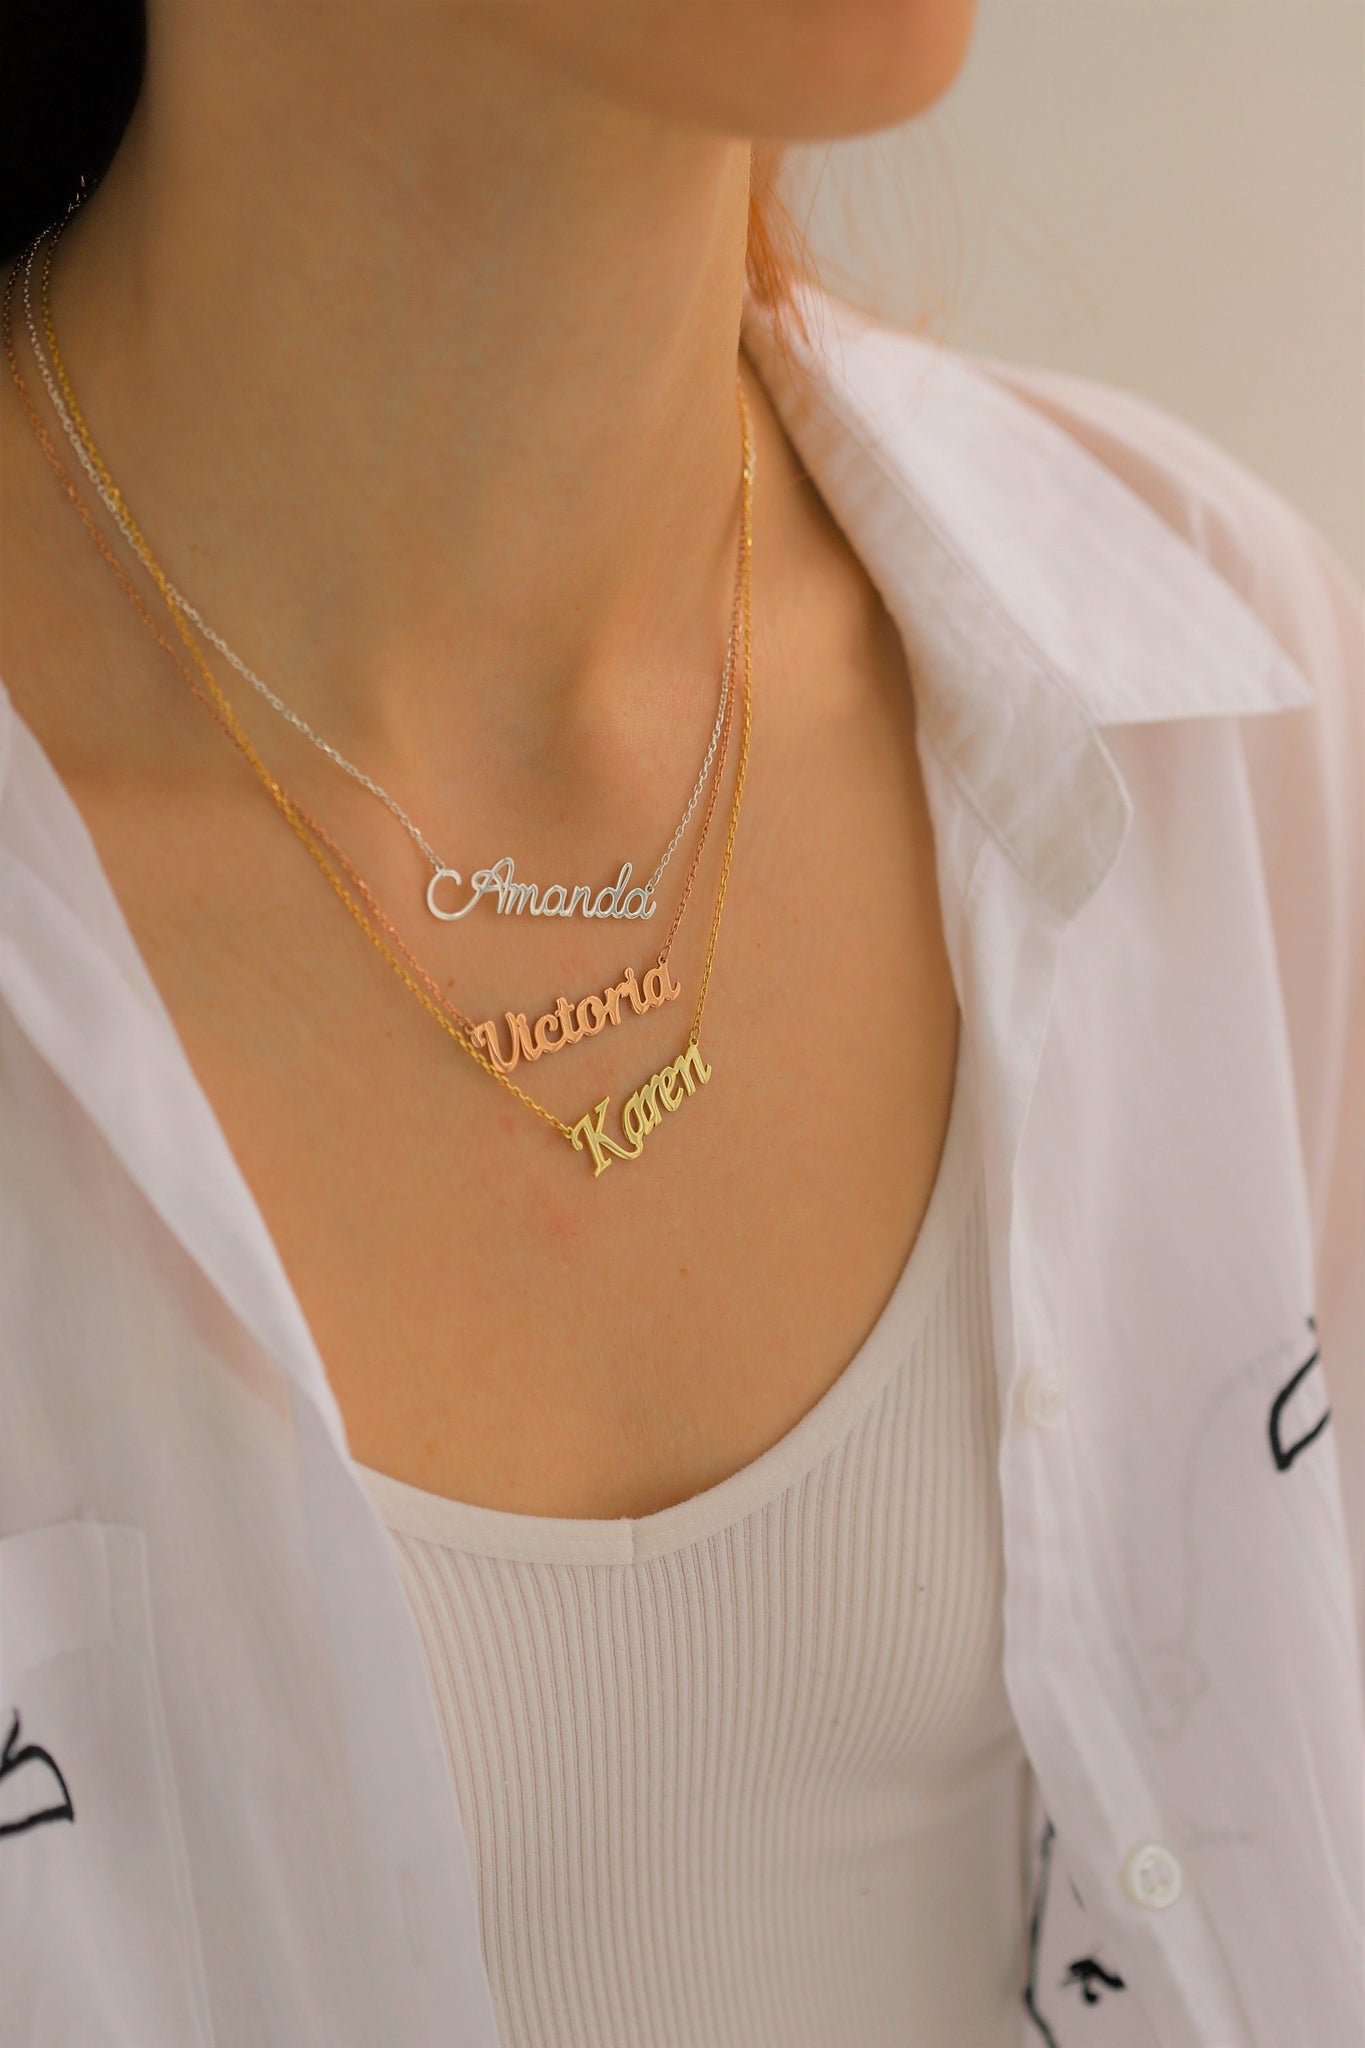 Custom Name Necklace, Gift Ideas For Mom, Personalized Monogram Necklace, Dainty Necklace, Mothers Day Necklace, Minimalist Mom Necklace